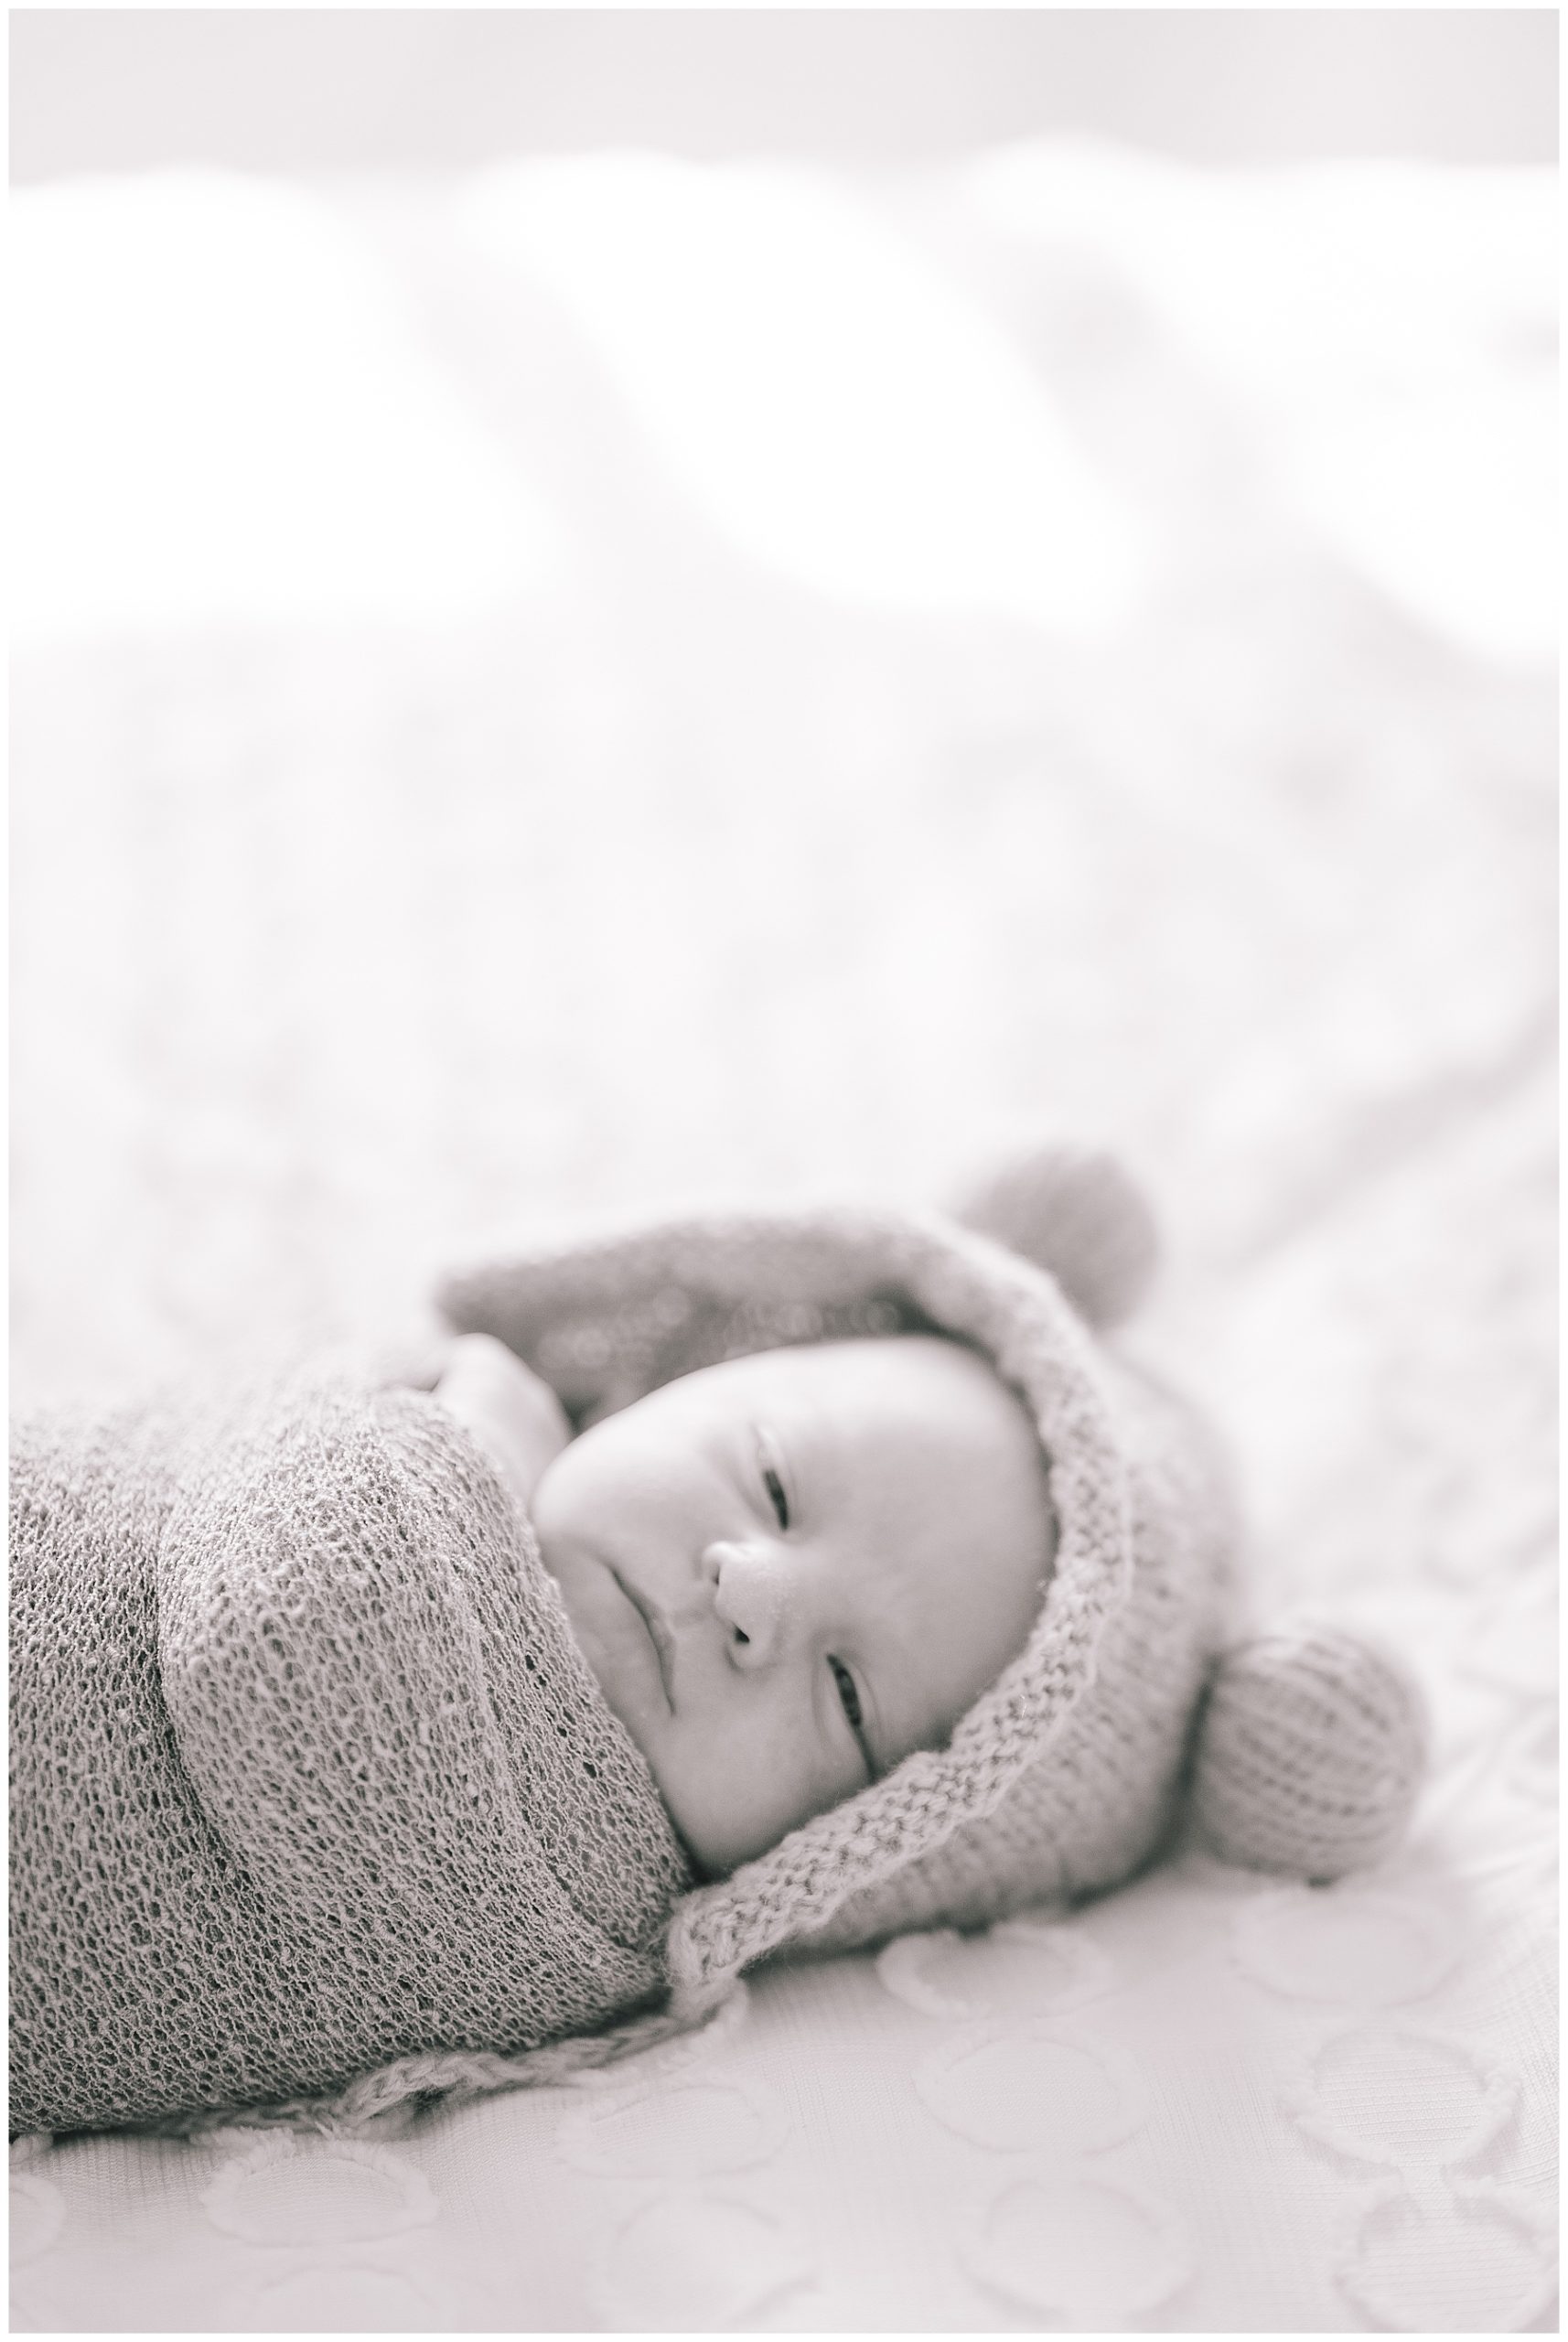 black and white photo of a baby boy for a newborn session, baby is swaddled ina wrap